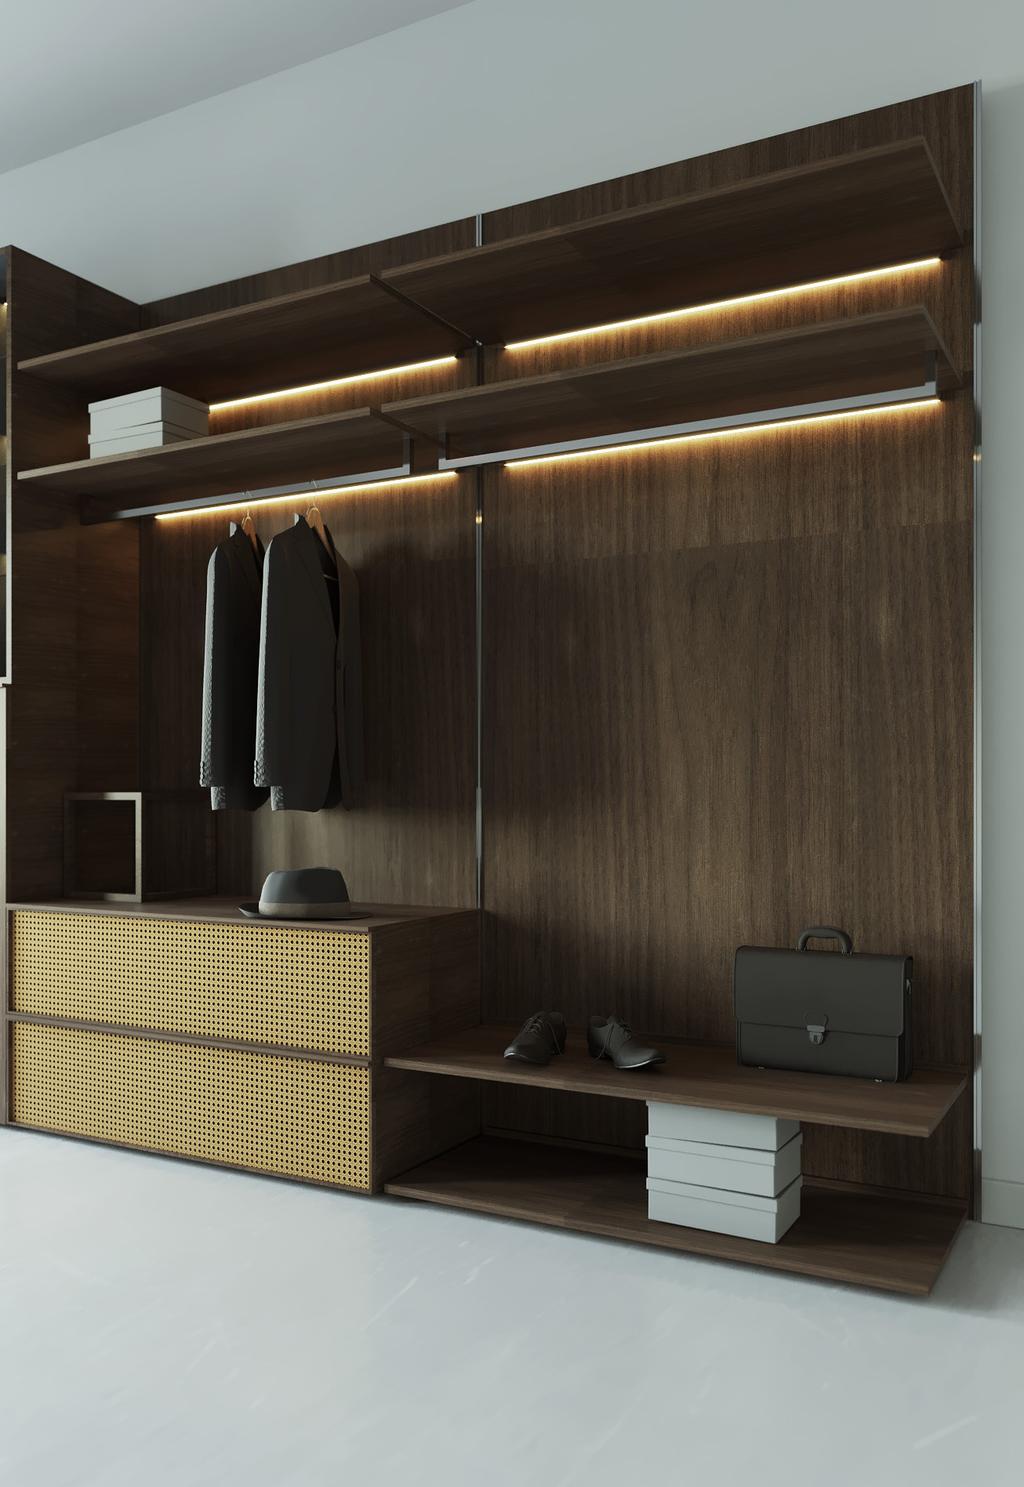 SWING STORAGE AND WARDROBE Customized wardrobes and walk-in closets characterized by the use of compartments with hinged